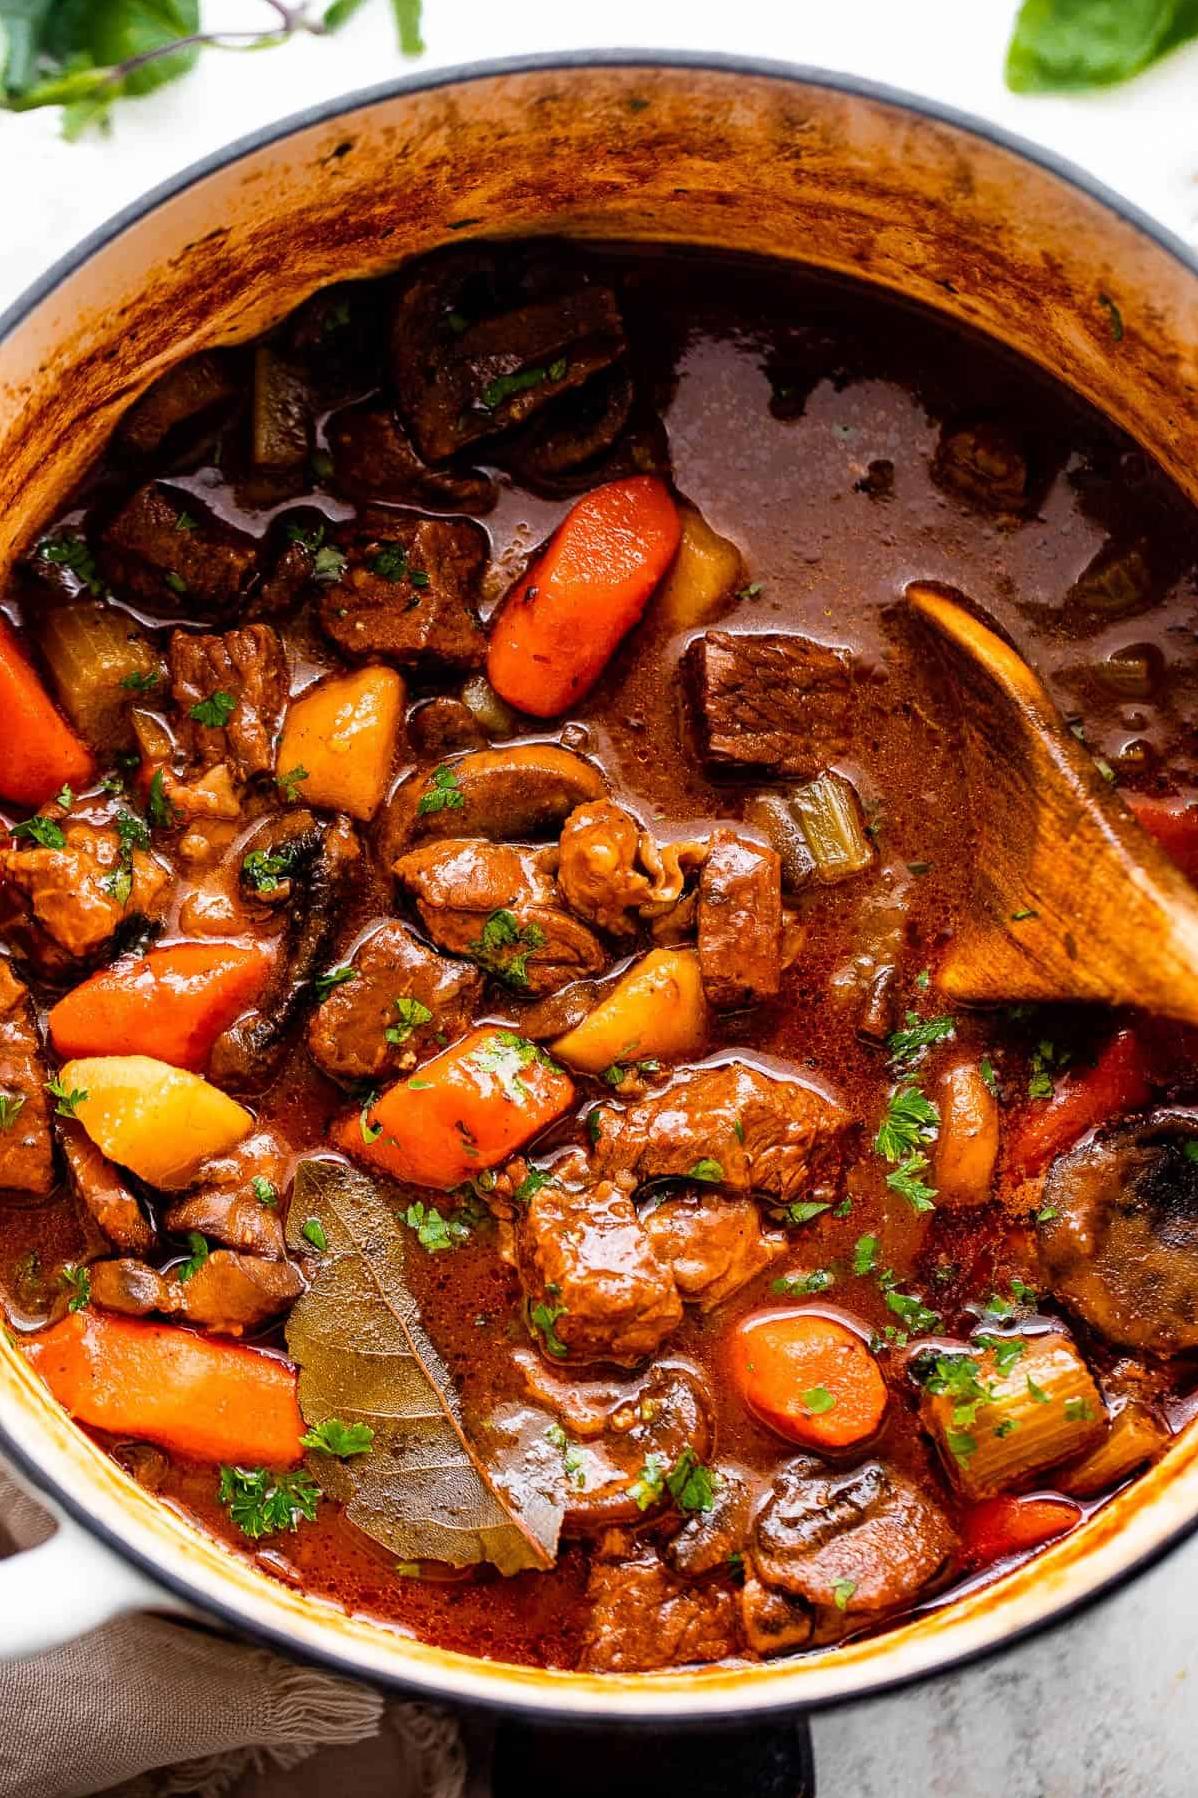  If you’re feeling homesick for Ireland, try making this stew to bring a little taste of home to your kitchen